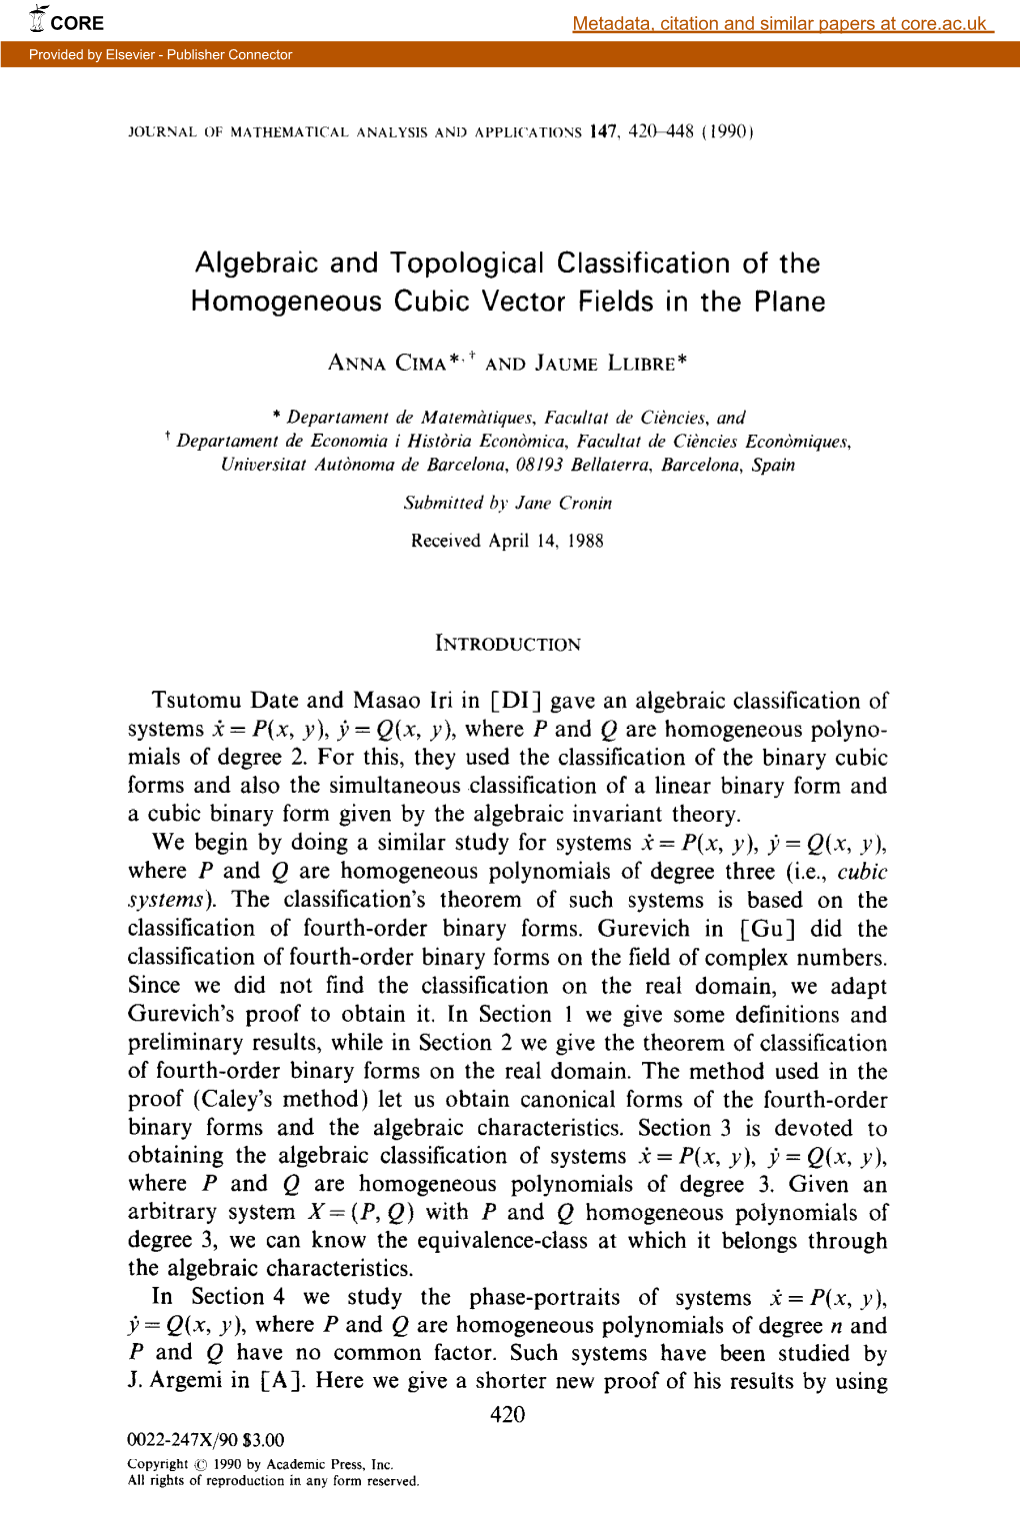 Algebraic and Topological Classification of the Homogeneous Cubic Vector Fields in the Plane